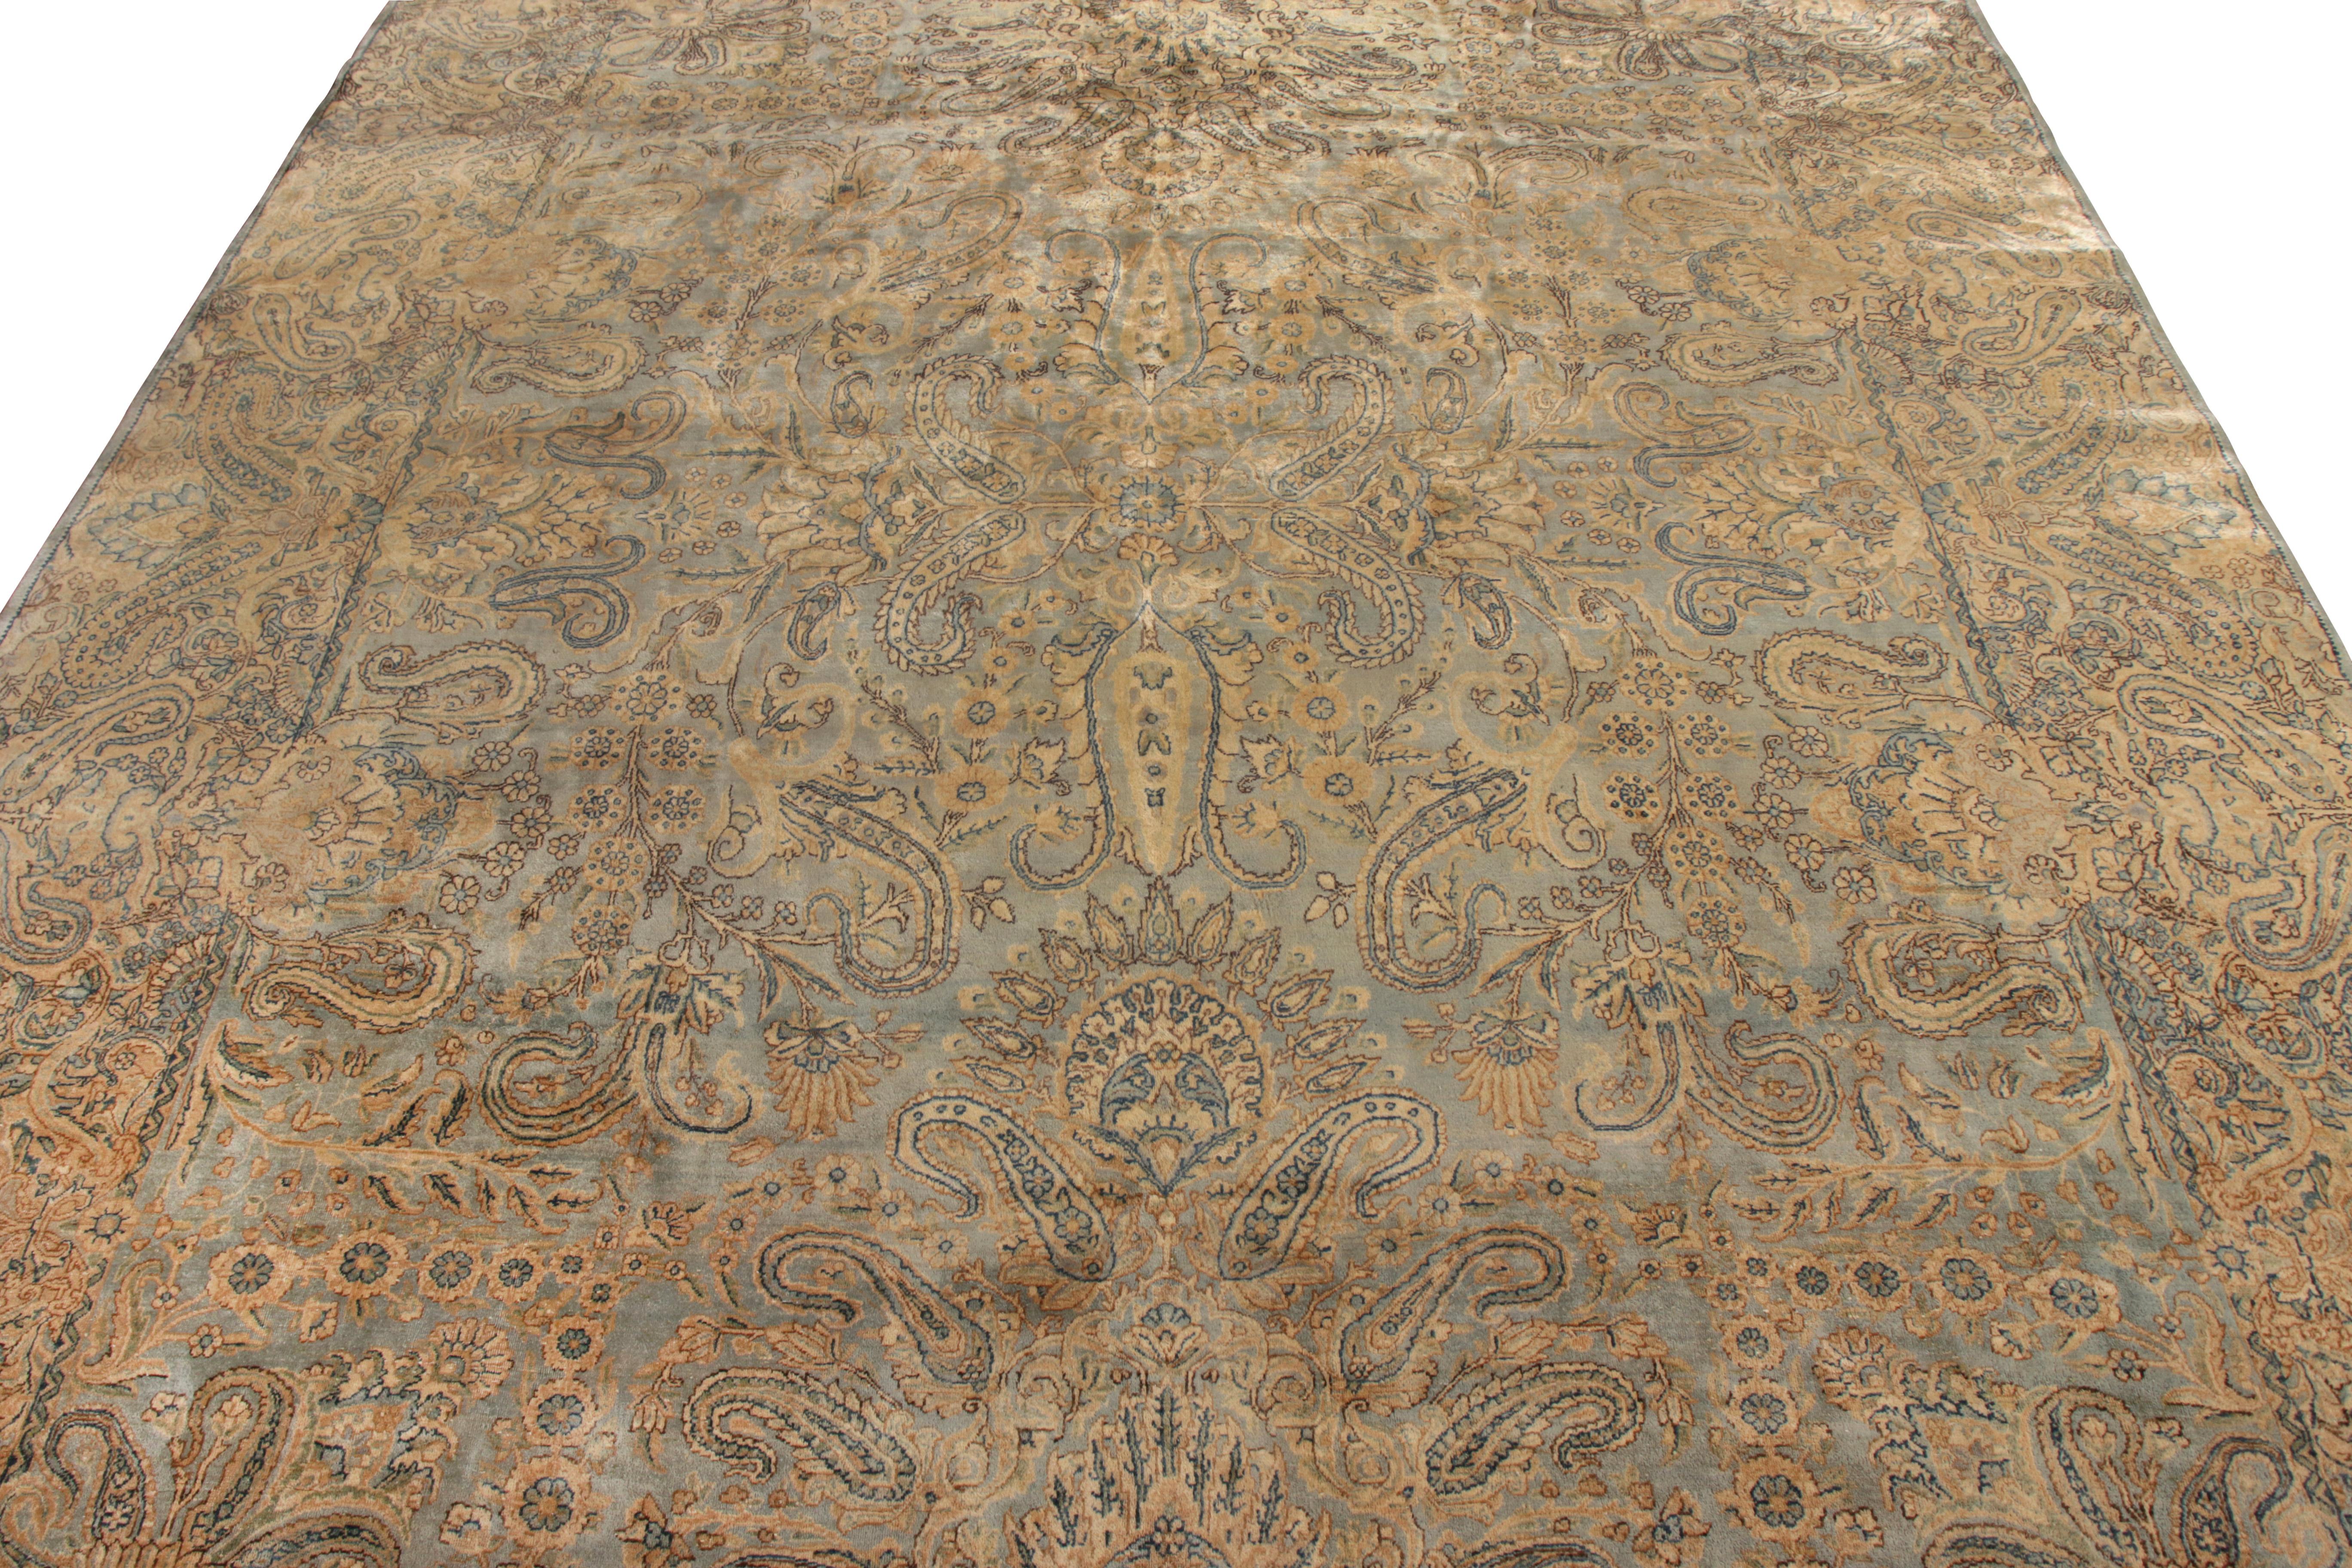 Hand knotted in wool circa 1890-1900, this Kerman rug is a crowning glory of Persian lineage. Enjoying a regal all over floral pattern with exceptional sense of movement, this transitional style features a union of golden and frosty blue hints,